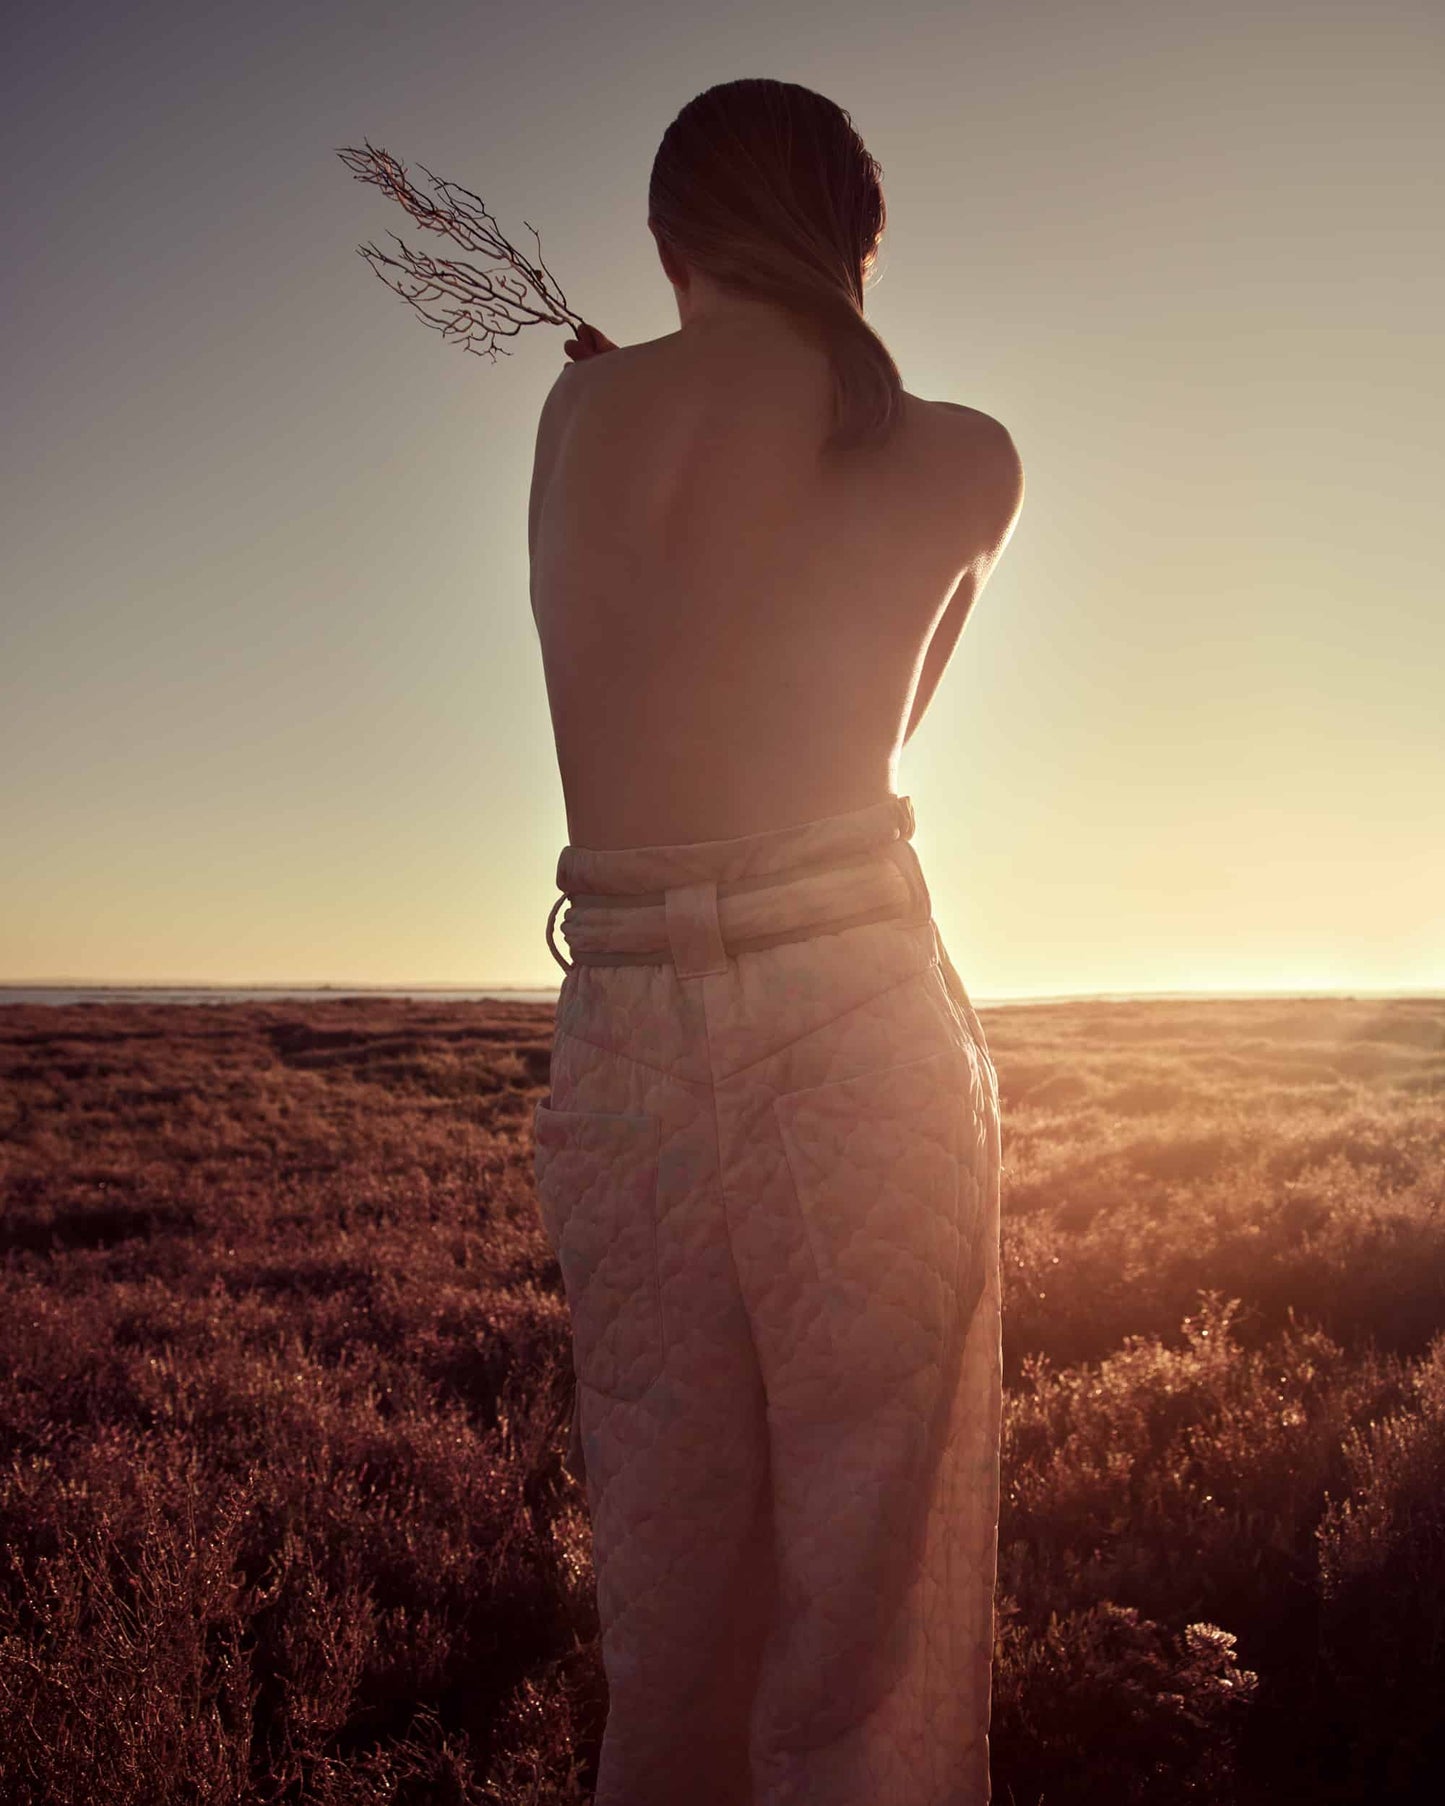 The artpiece 'Hold' by Andreas Ortner shows a woman in a long grass field with the sunset at the horizon, who is wearing high-waisted pants and no top. She is embracing herself and holding a twig in one hand.